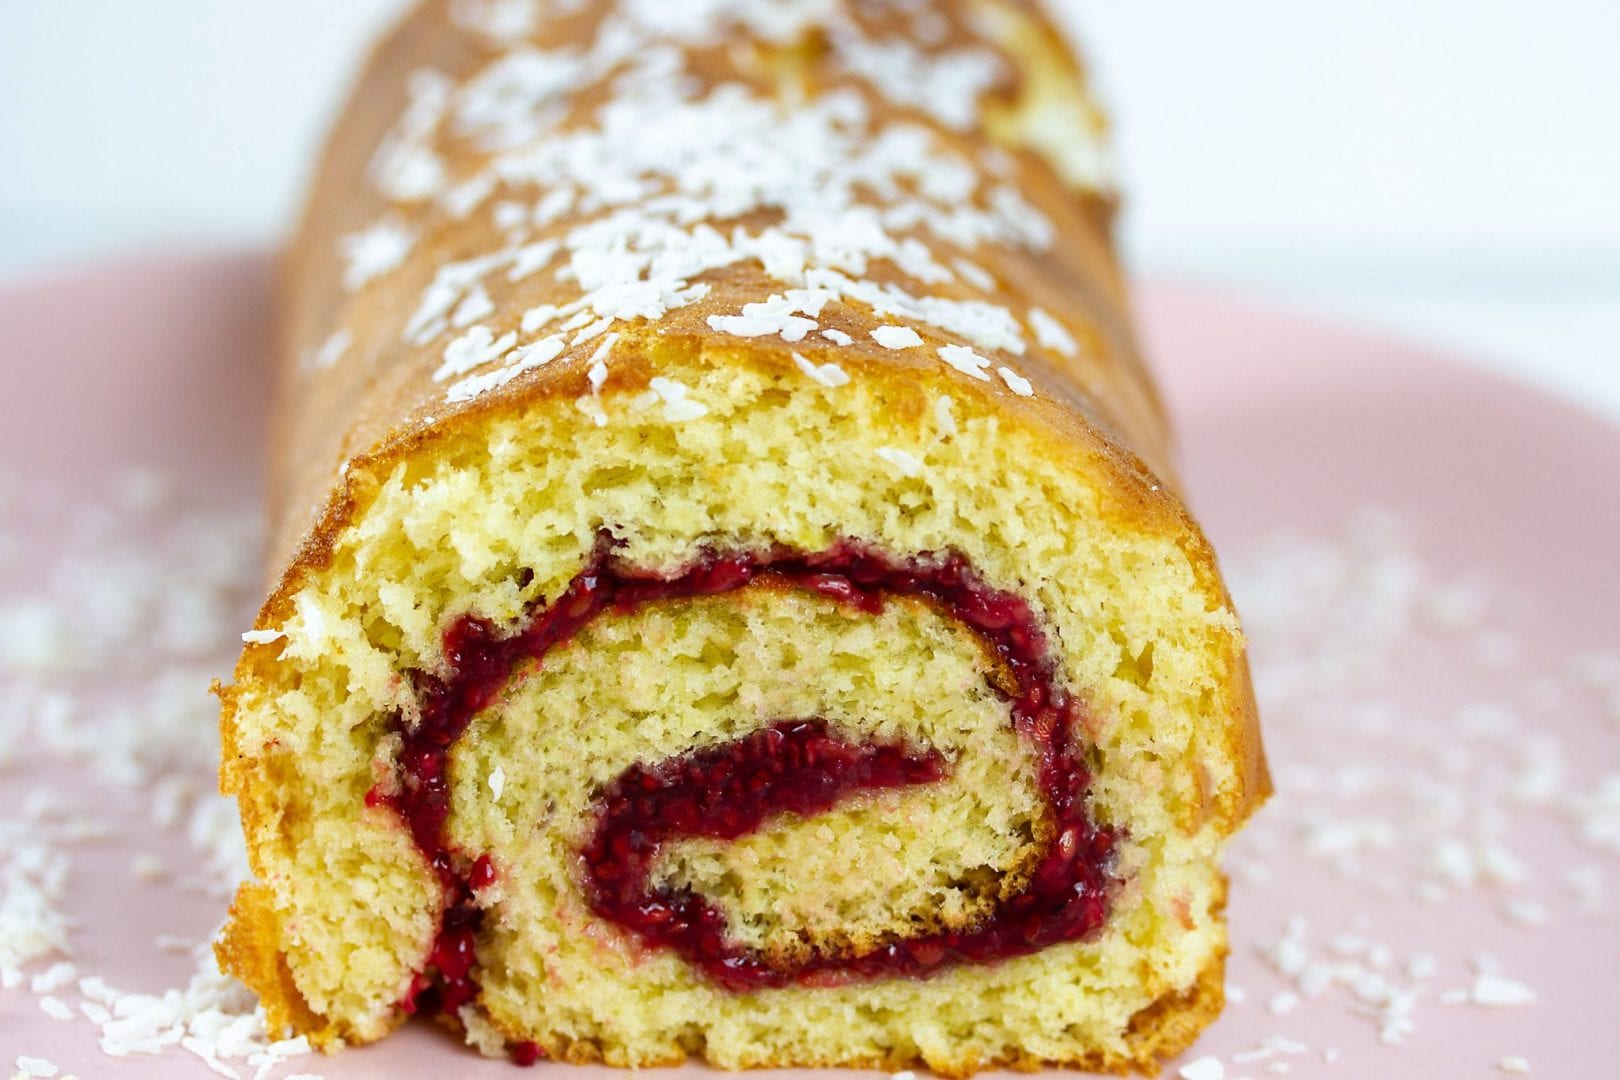 Jam roly poly cake - make this delicious sponge cake